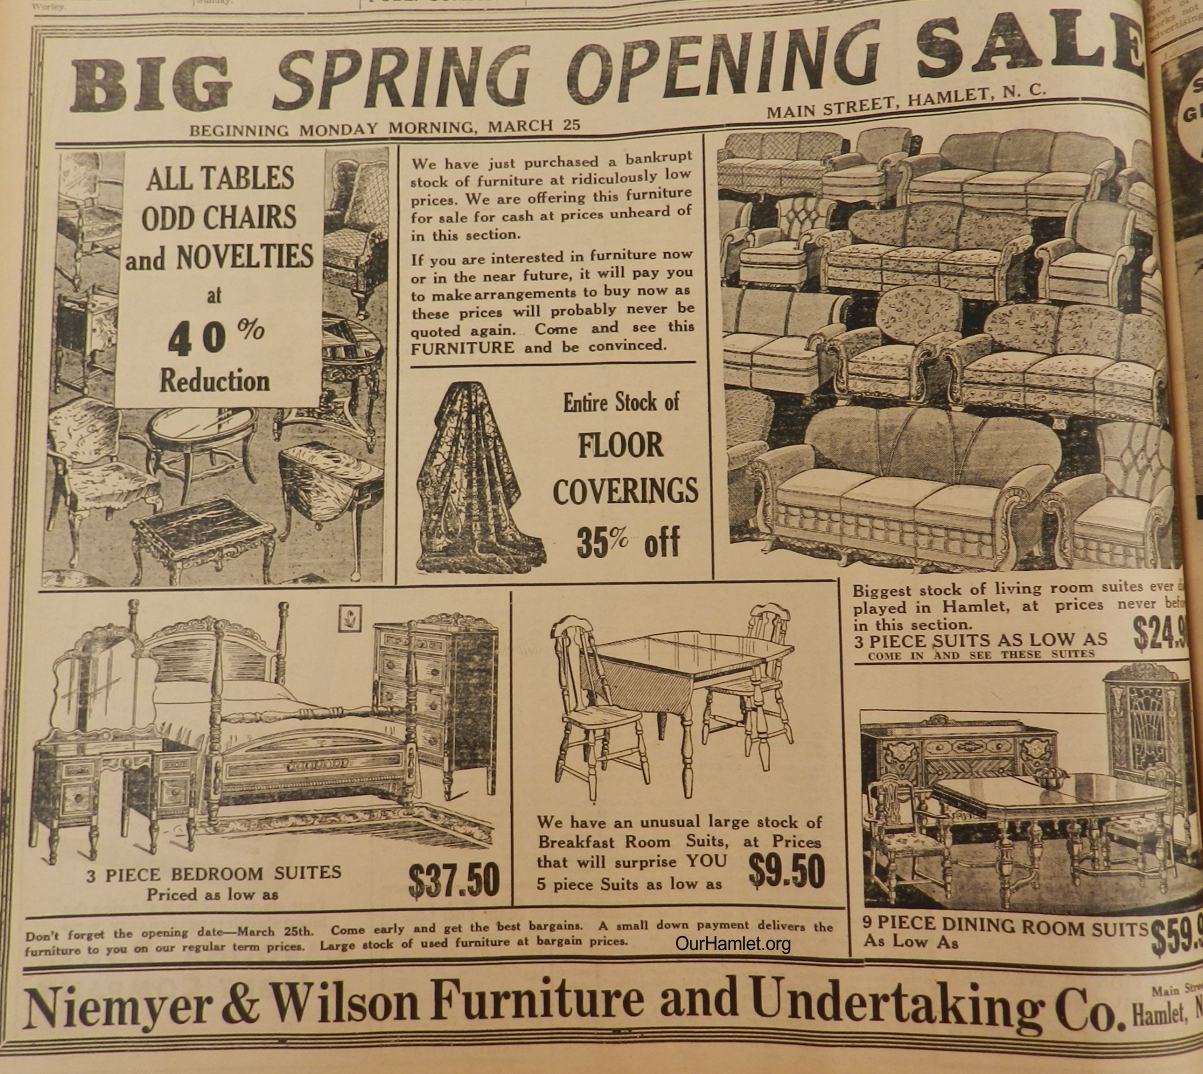 1935 Niemyer and Wilson Furniture and Undertaking OH.jpg